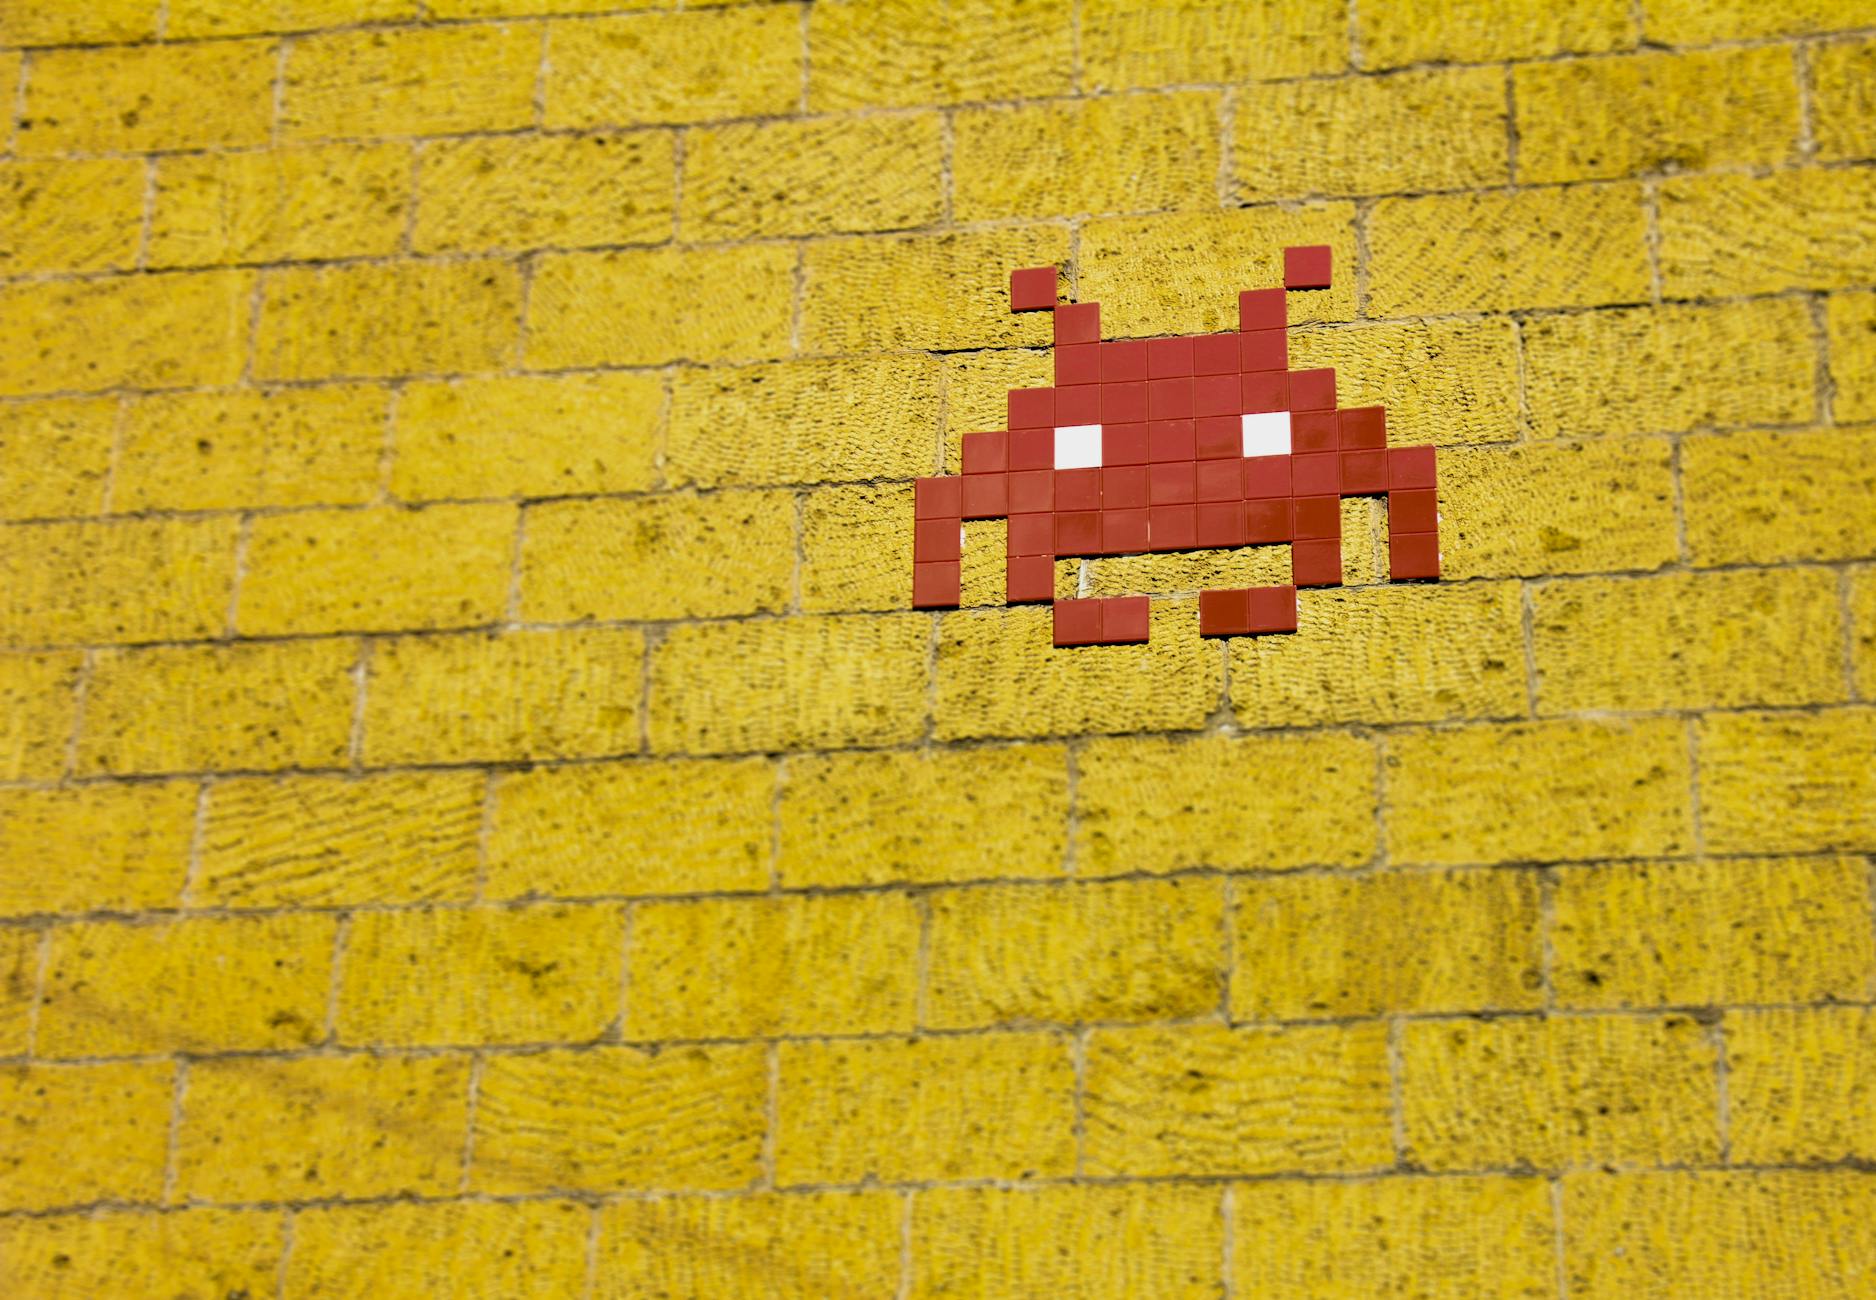 Space Invader on brick wall (public domain image)